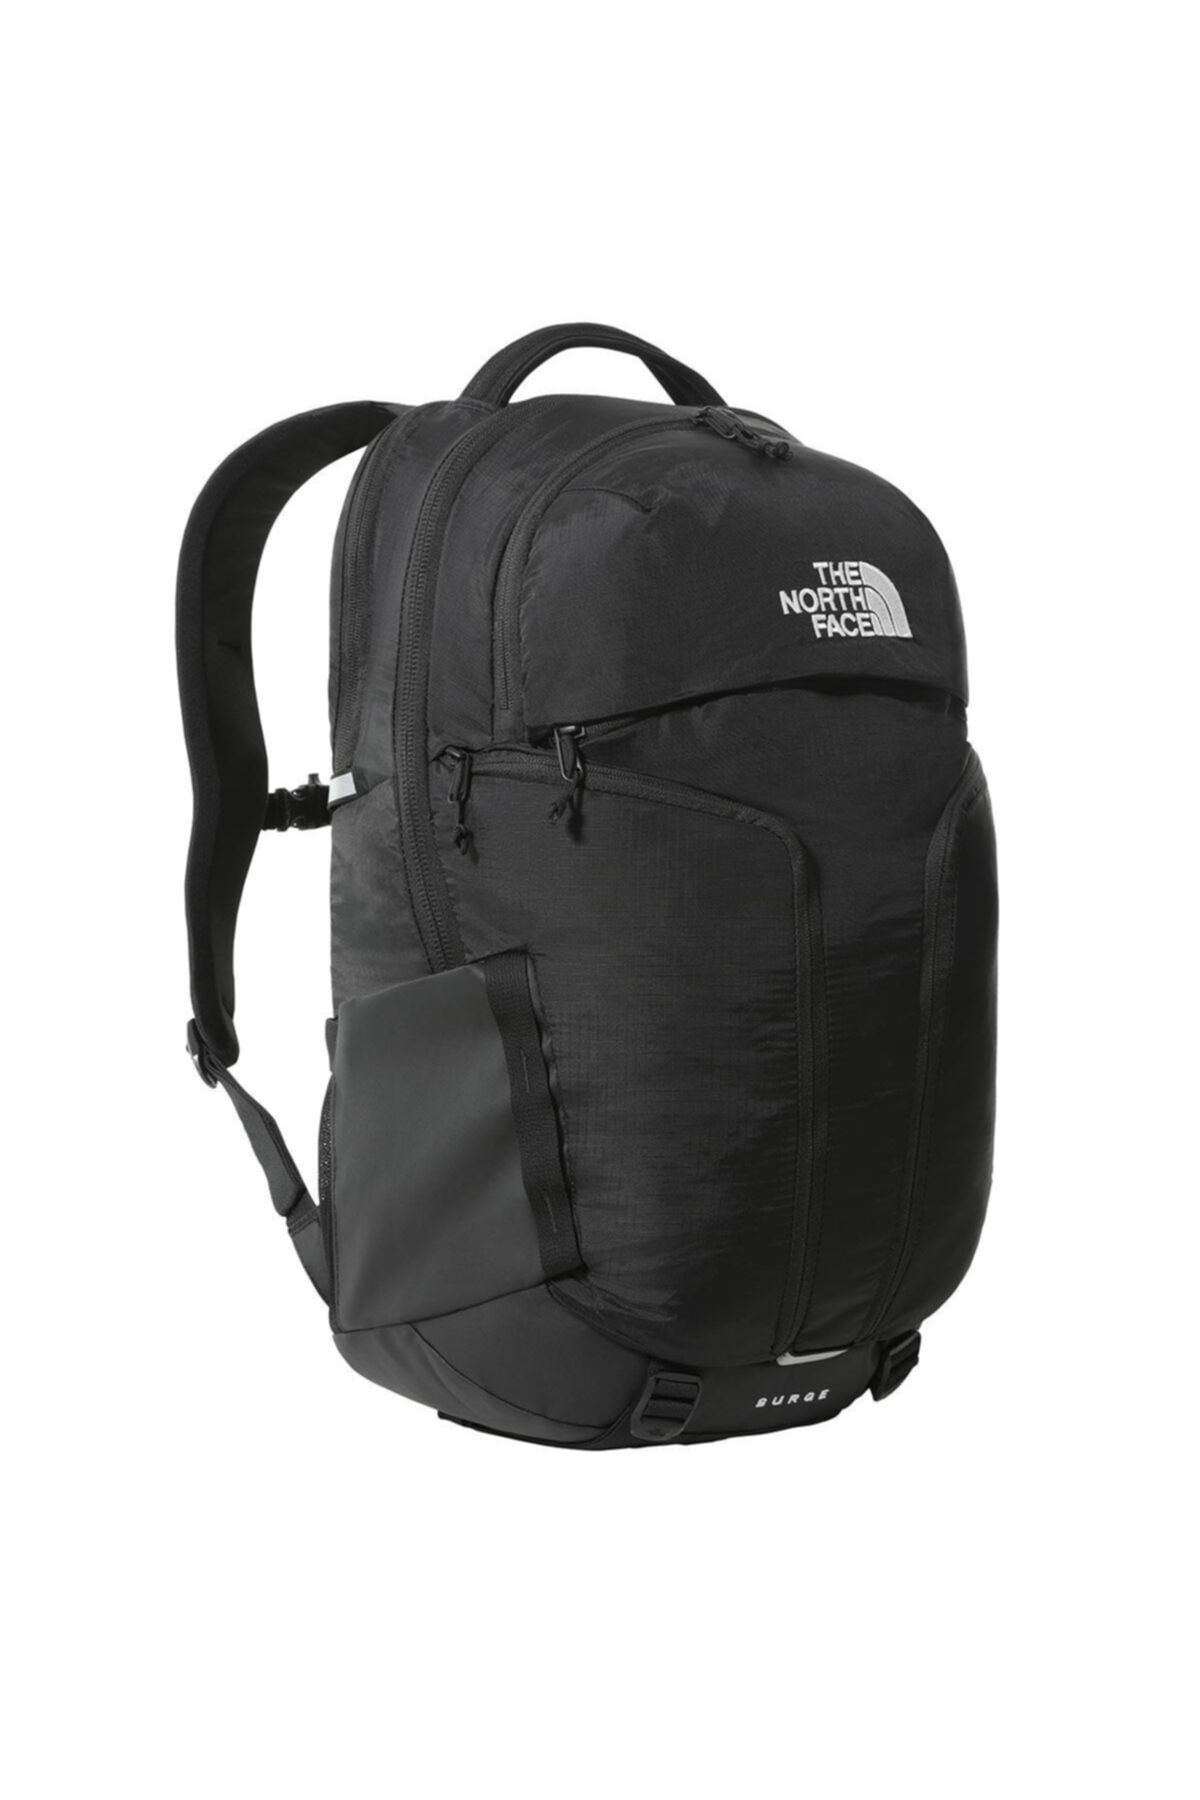 The North Face The Northface Surge Nf0a52sgkx71